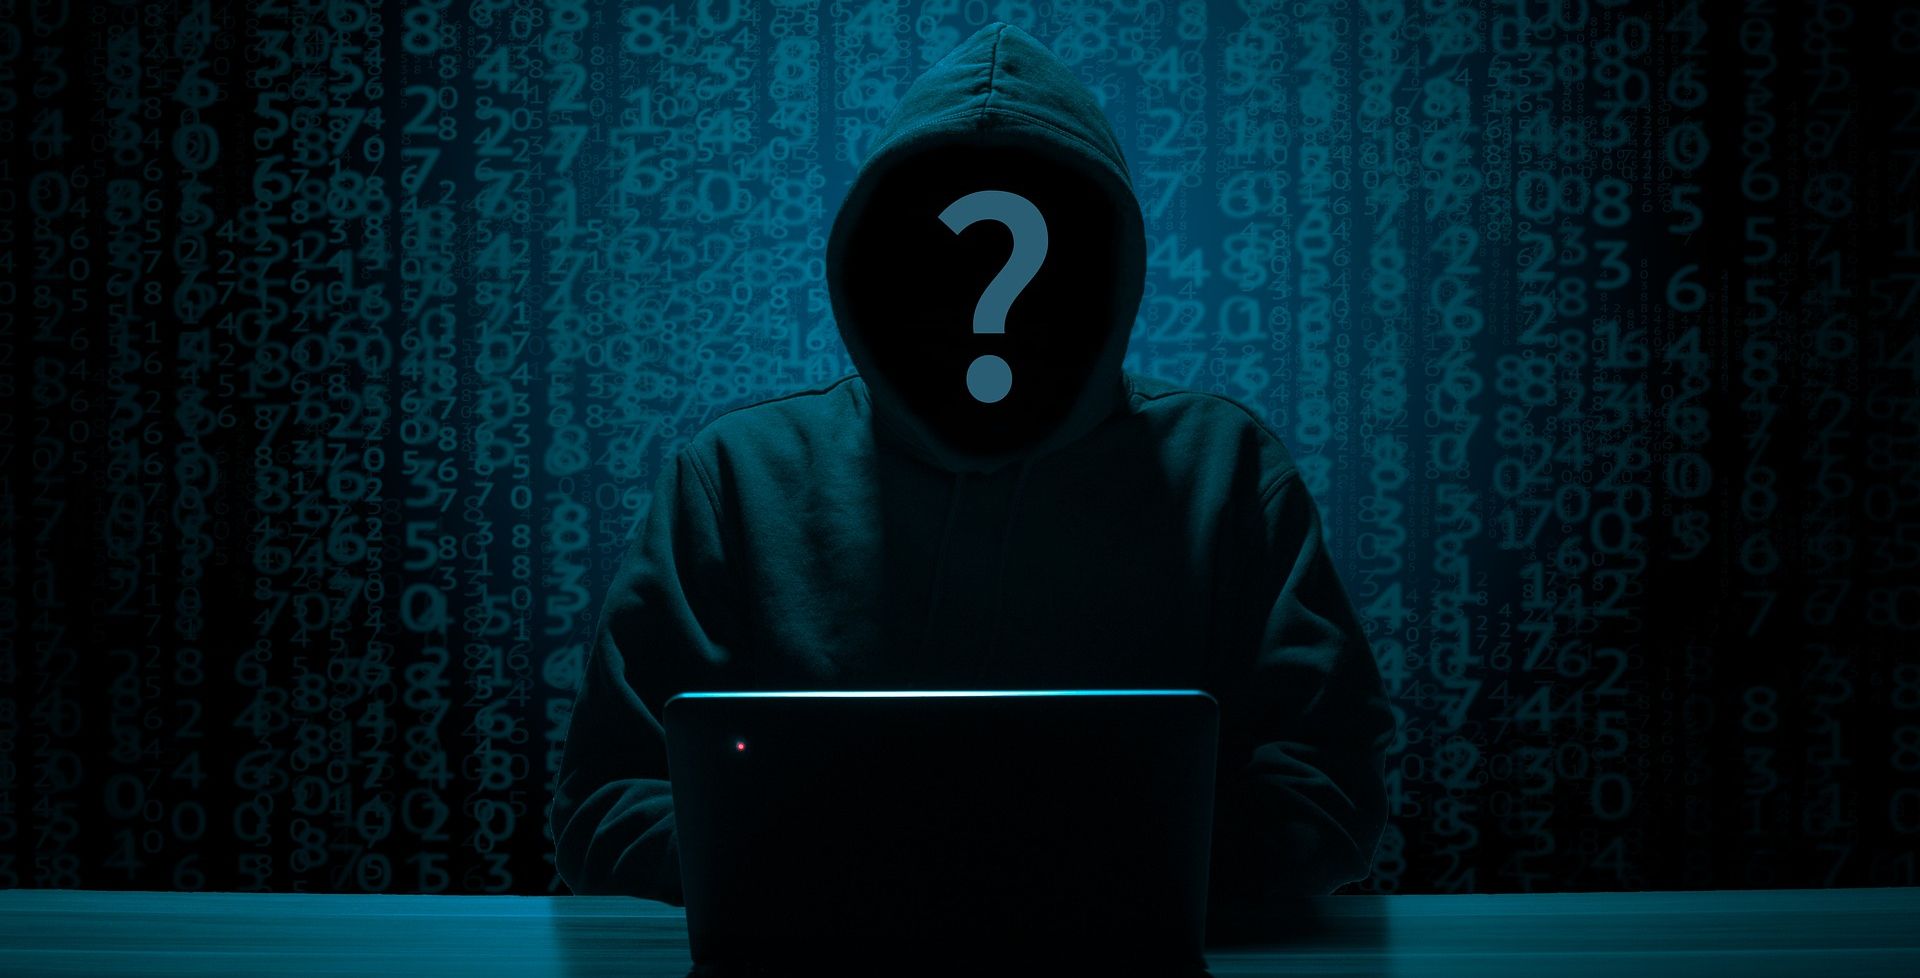 anonymous hooded individual using laptop in front of code background 